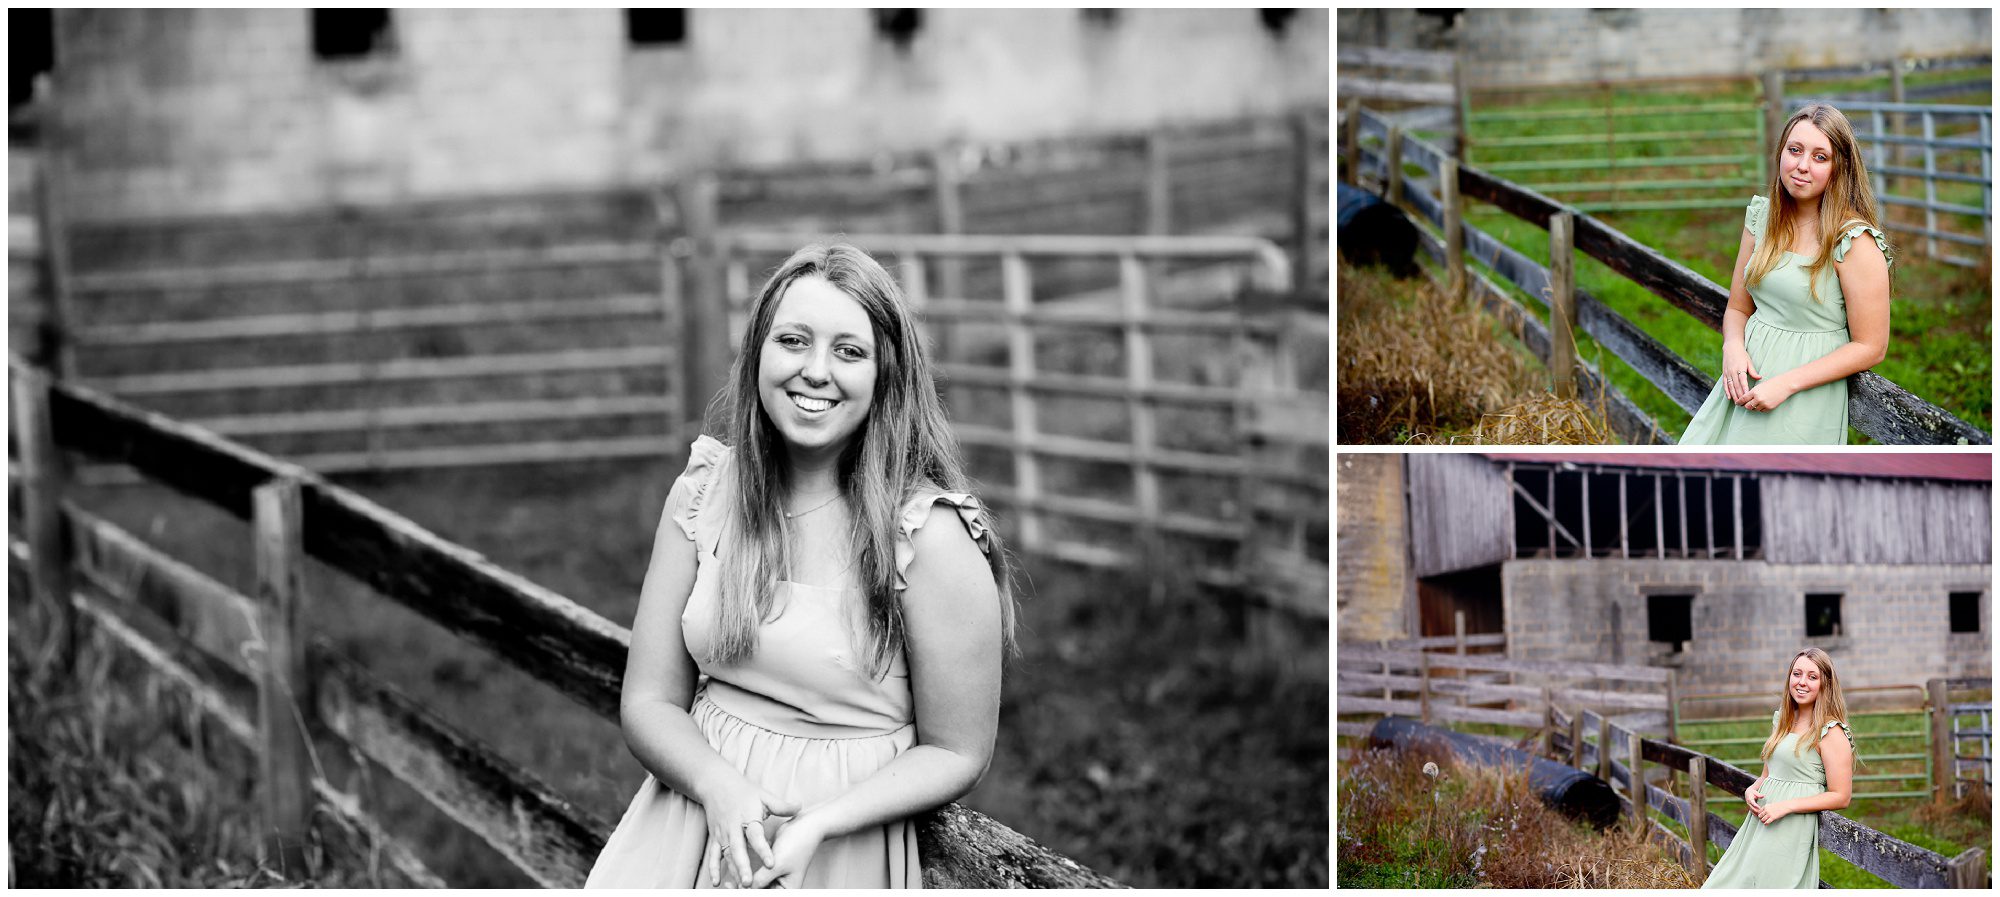 Fluvanna County High School Class of 2022 Senior Portraits at Rural Family Farm fchs22 fchs pictures charlottesville photographer Fluco Photography Teen